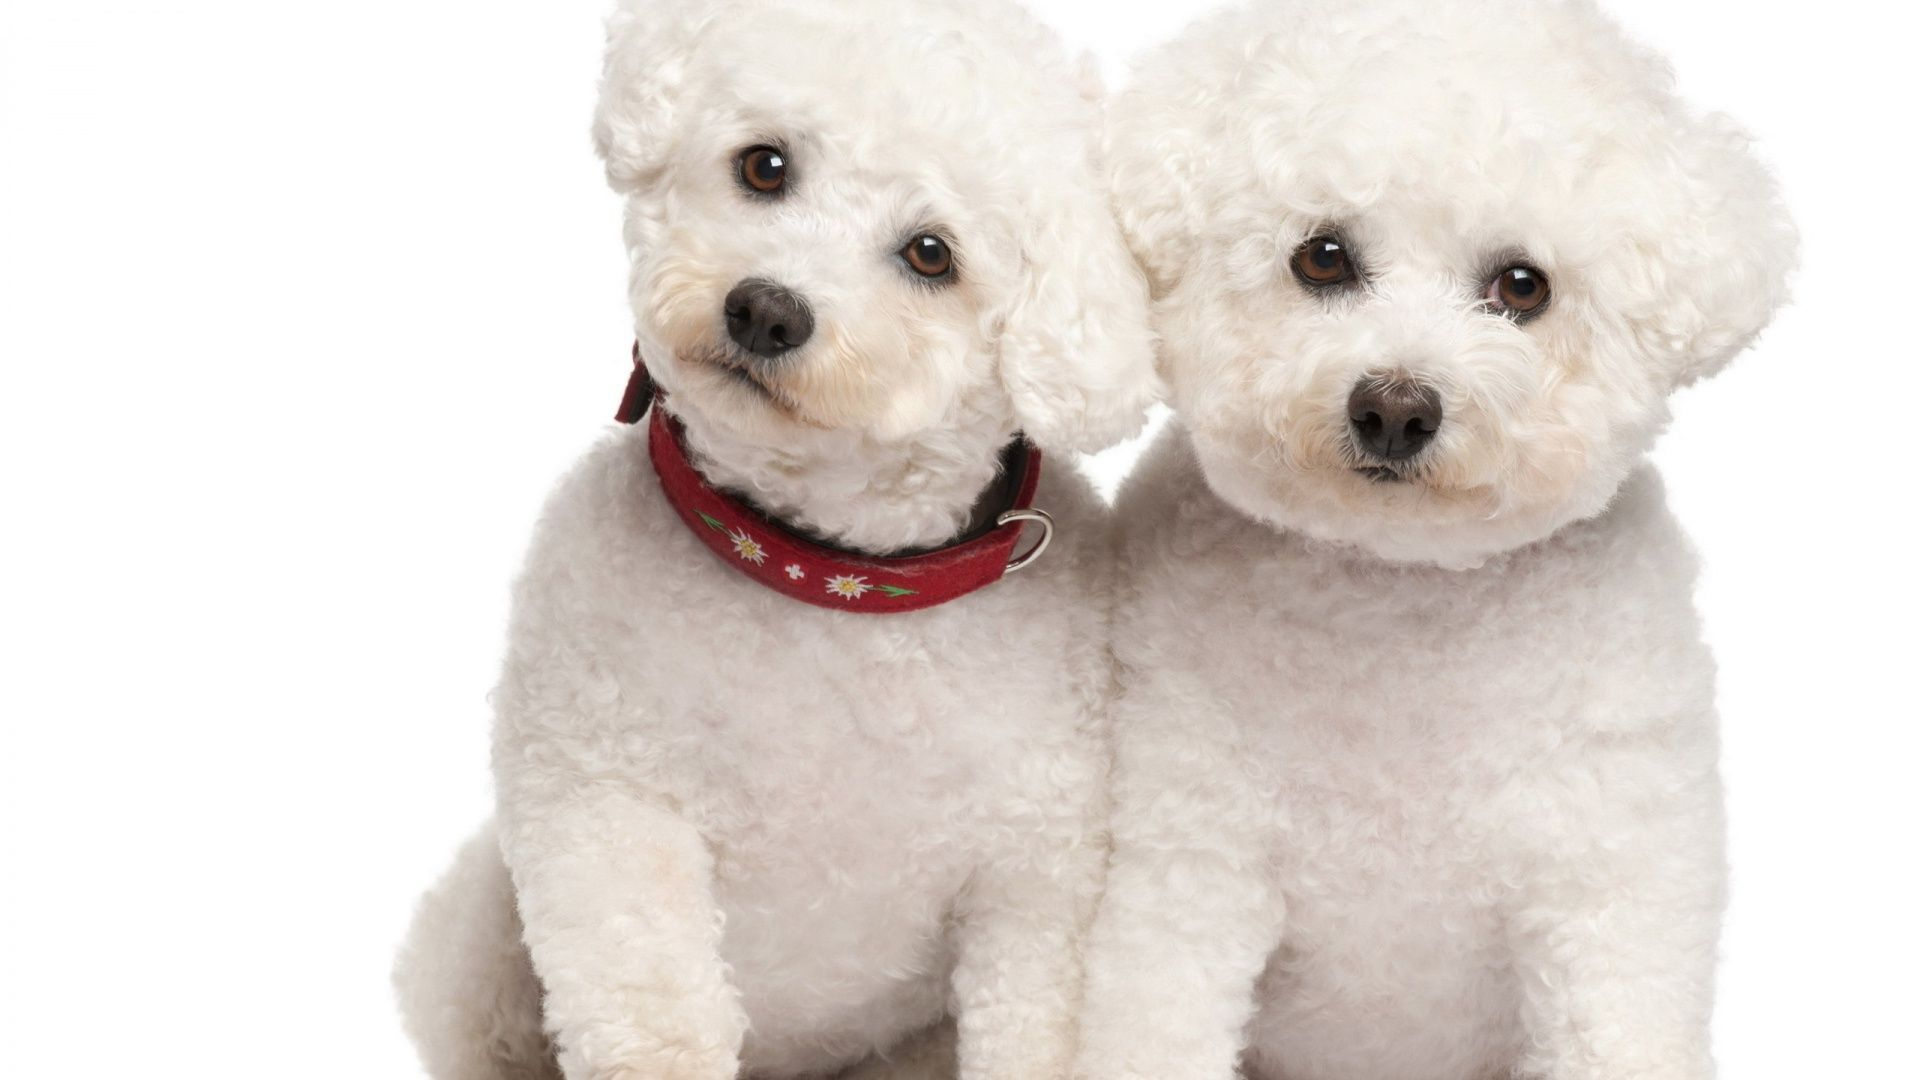 1920x1080 Images For \u003e Cute Toy Poodle Wallpaper | Bichon frise puppy, Poodle dog, Bichon frise dogs